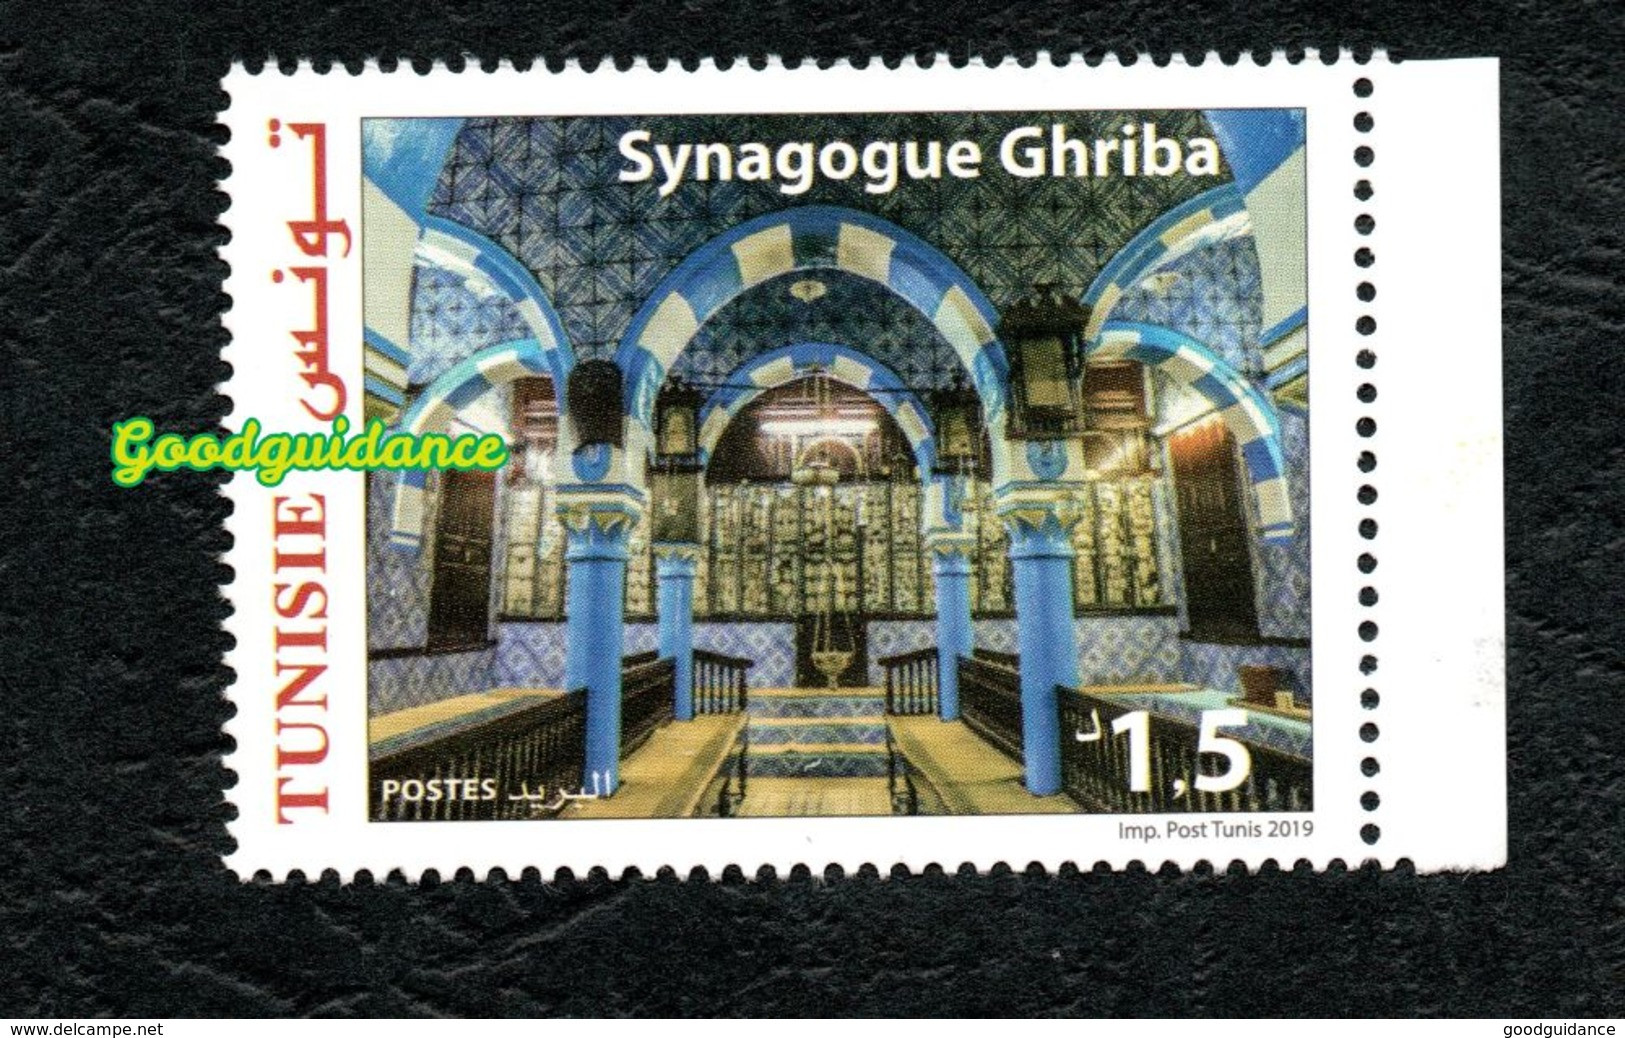 2019- Tunisia - The Synagogue Of Ghriba In Djerba-  Complete Set 1v.MNH** - Tunesien (1956-...)